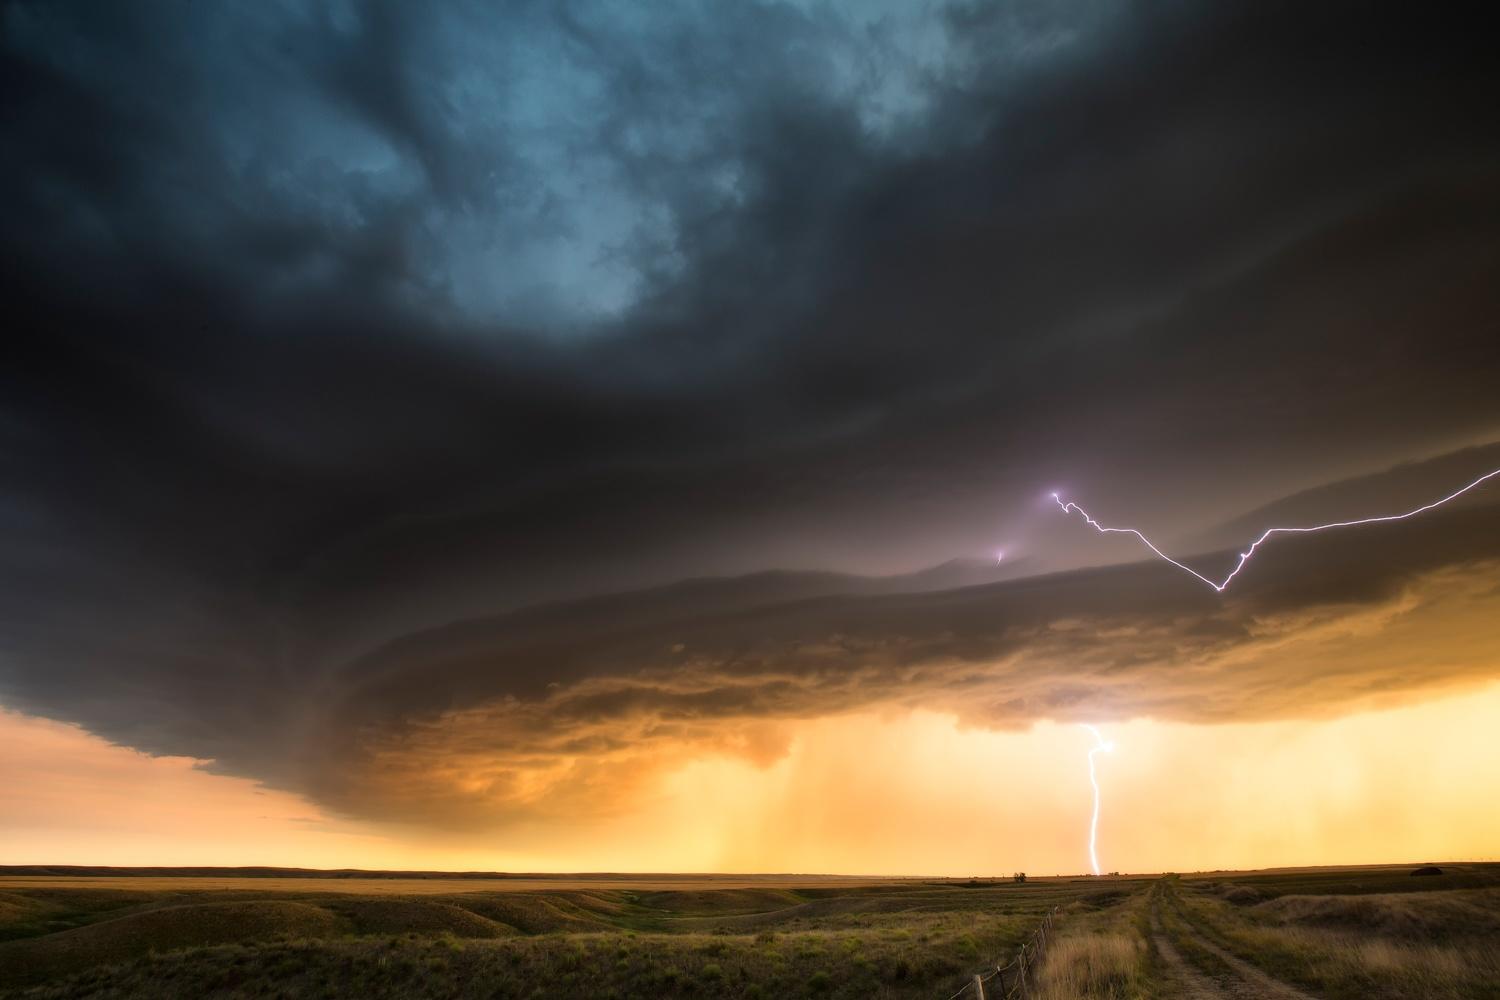 Supercell on the edge of the Badlands